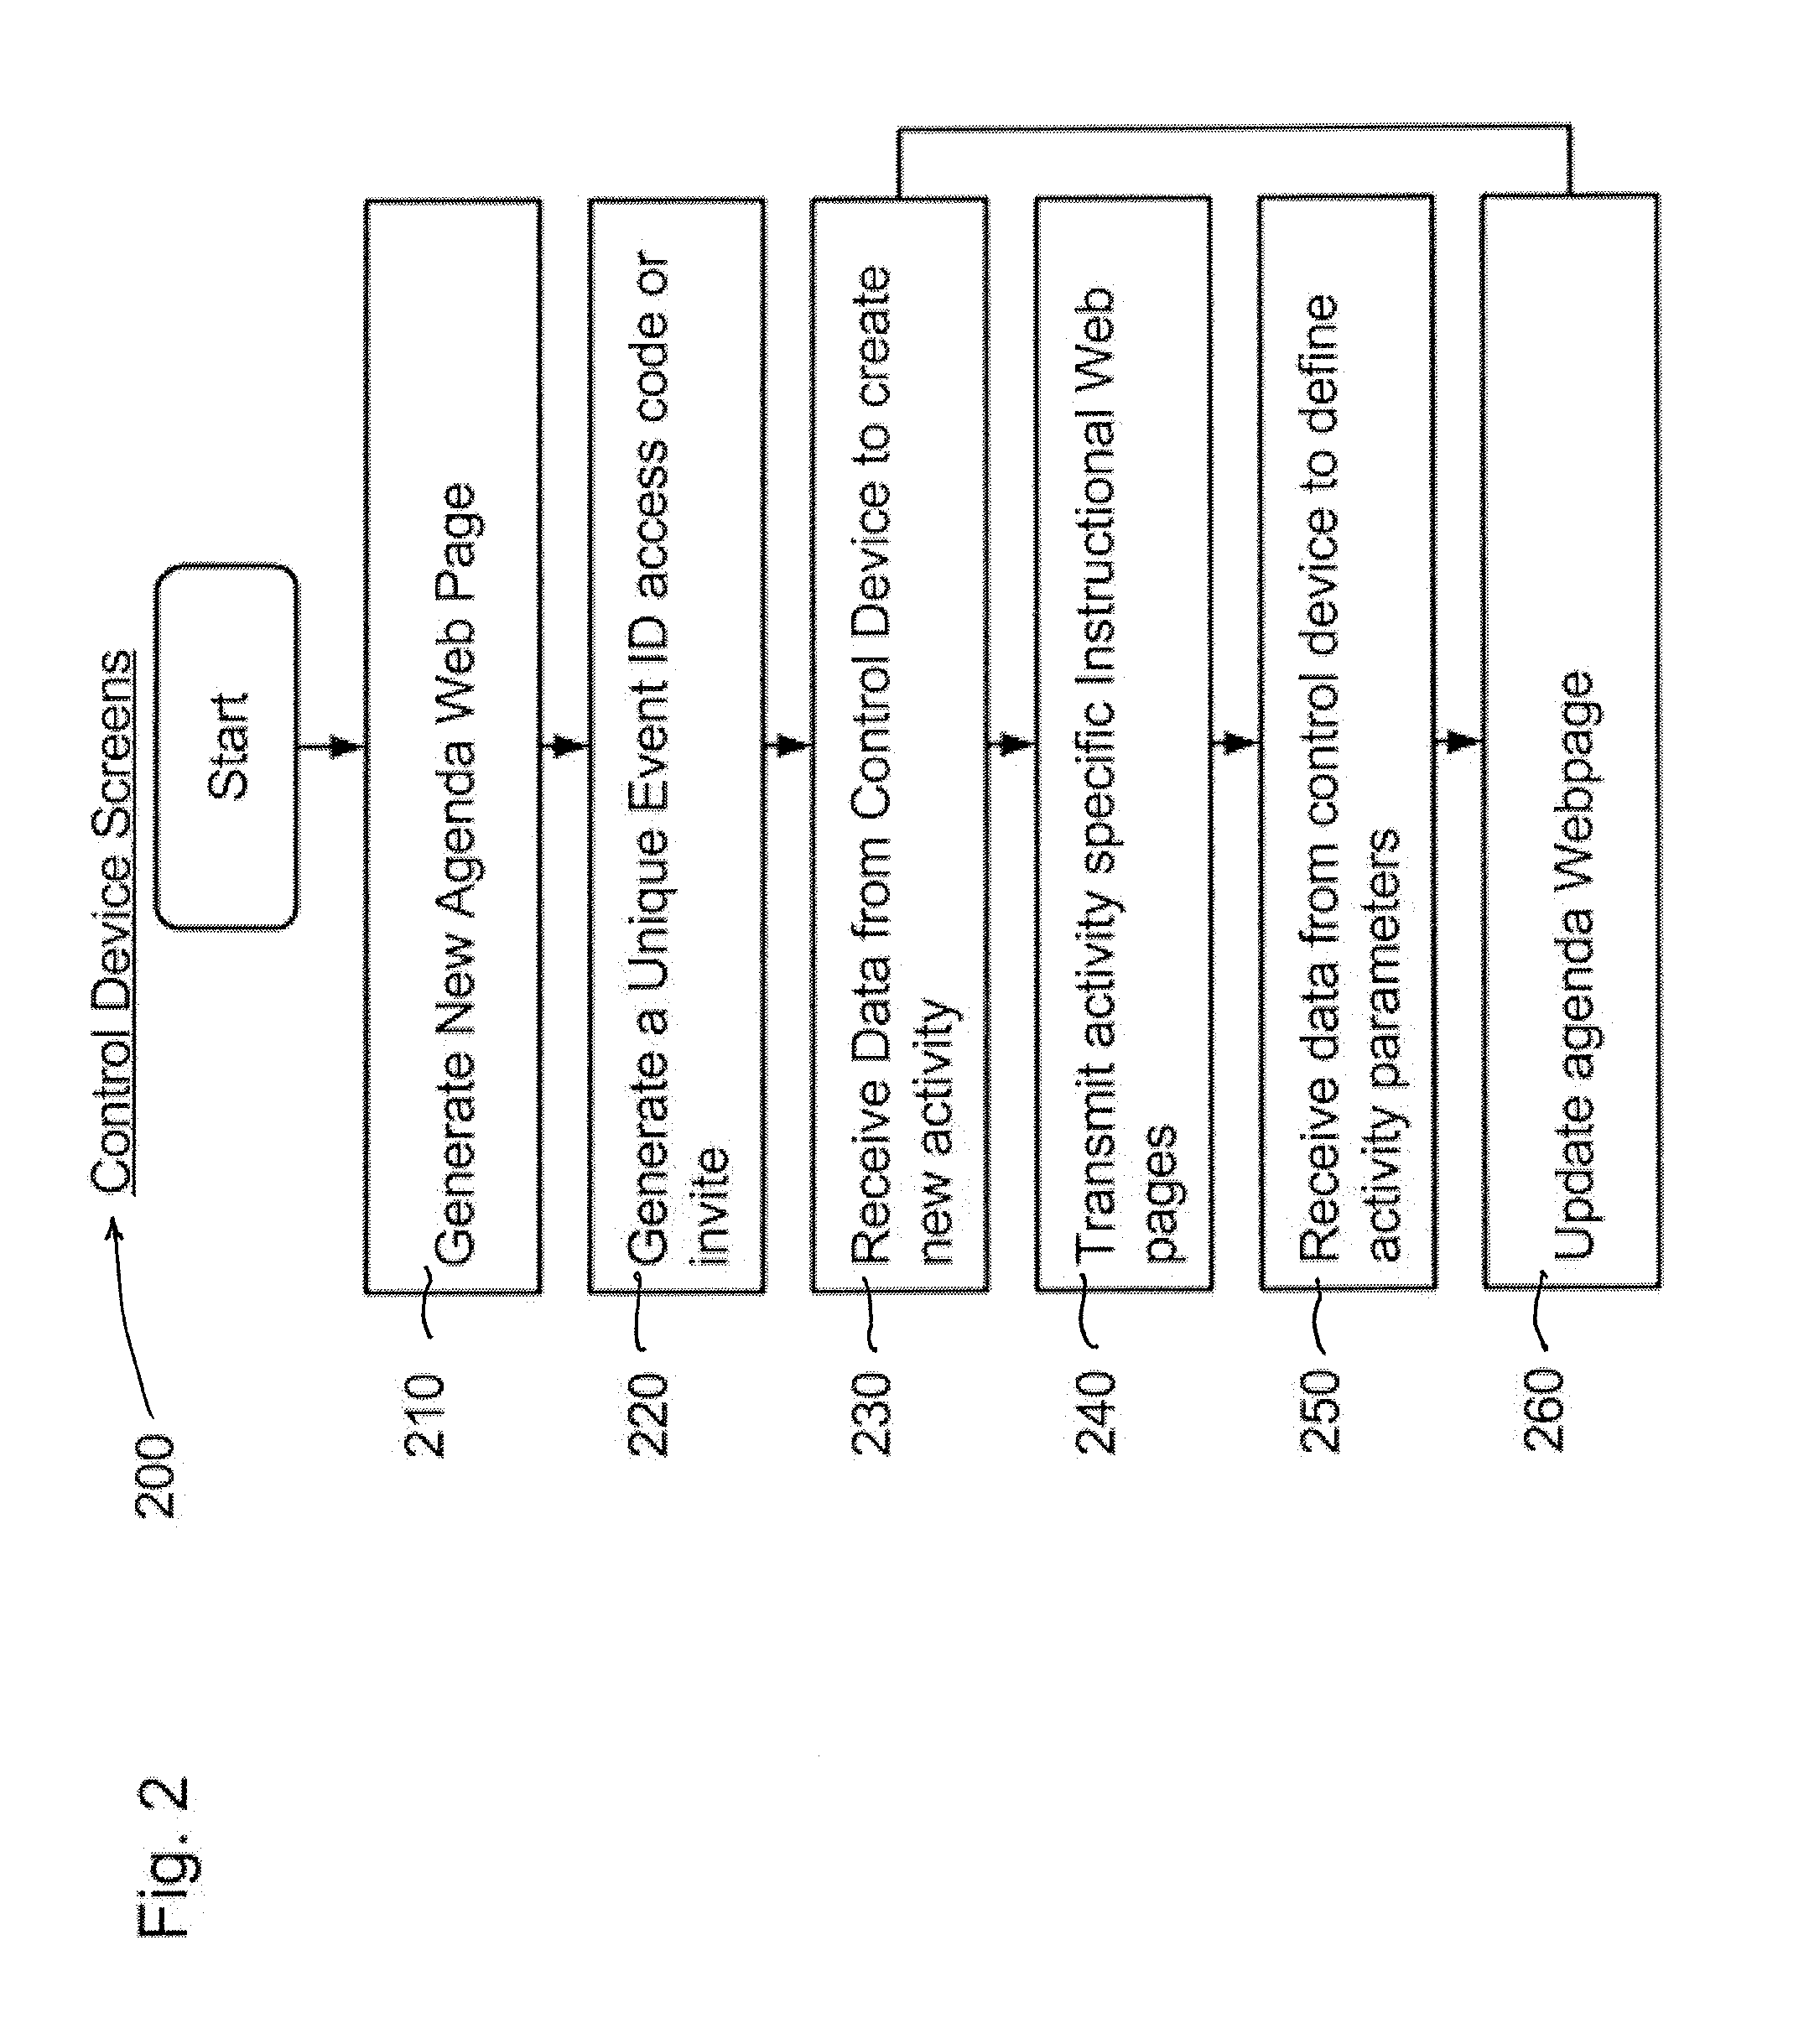 Method and system for operating a collaborative network